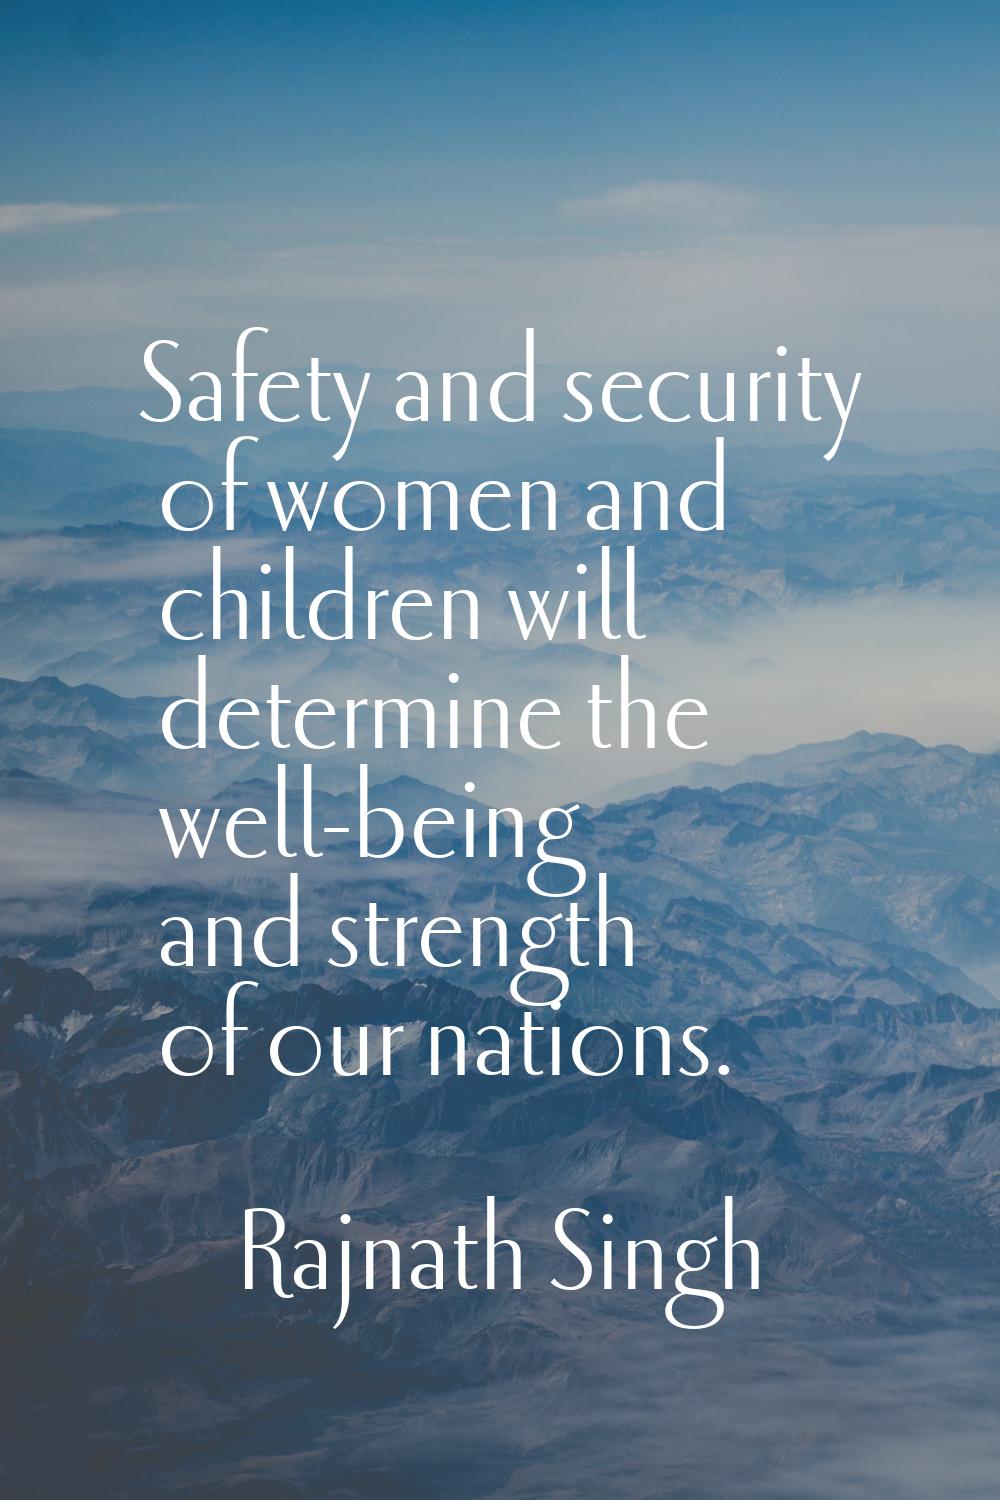 Safety and security of women and children will determine the well-being and strength of our nations